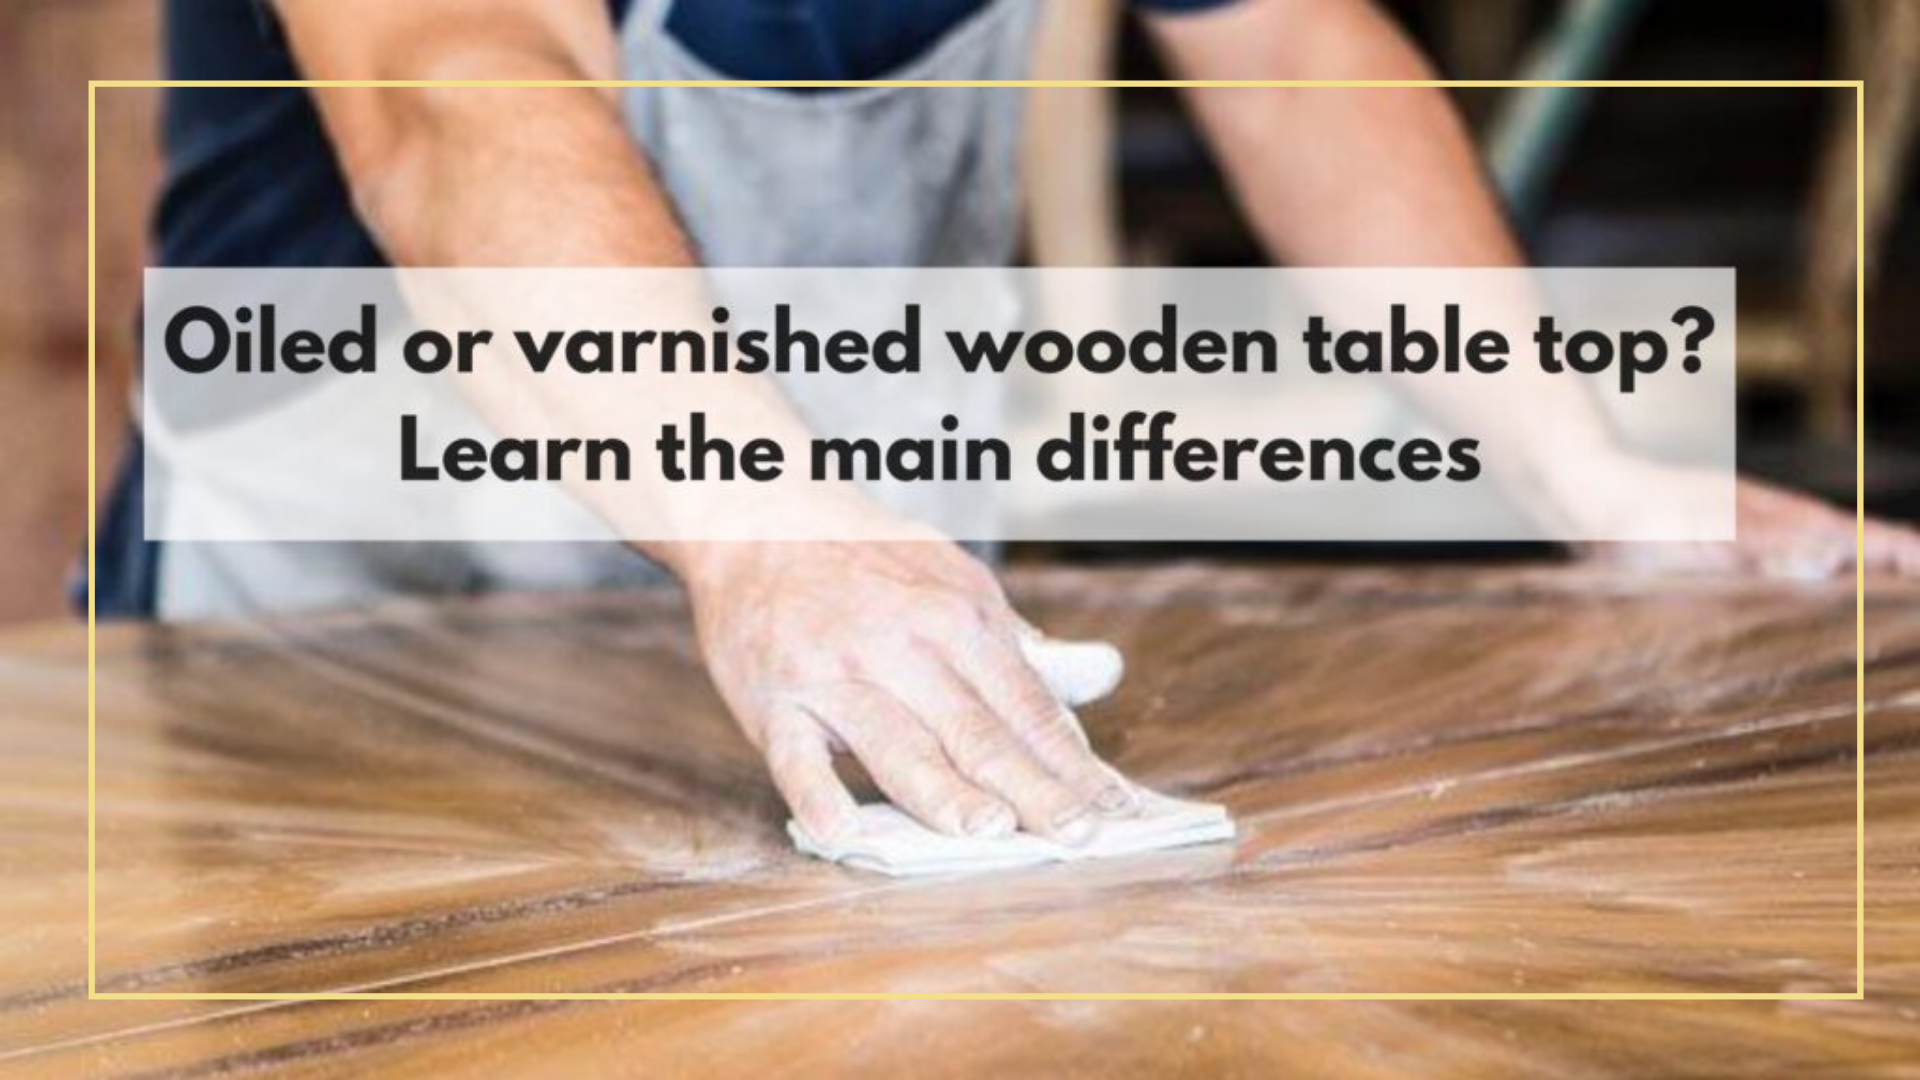 Oiled or varnished wooden table top? Learn the main differences